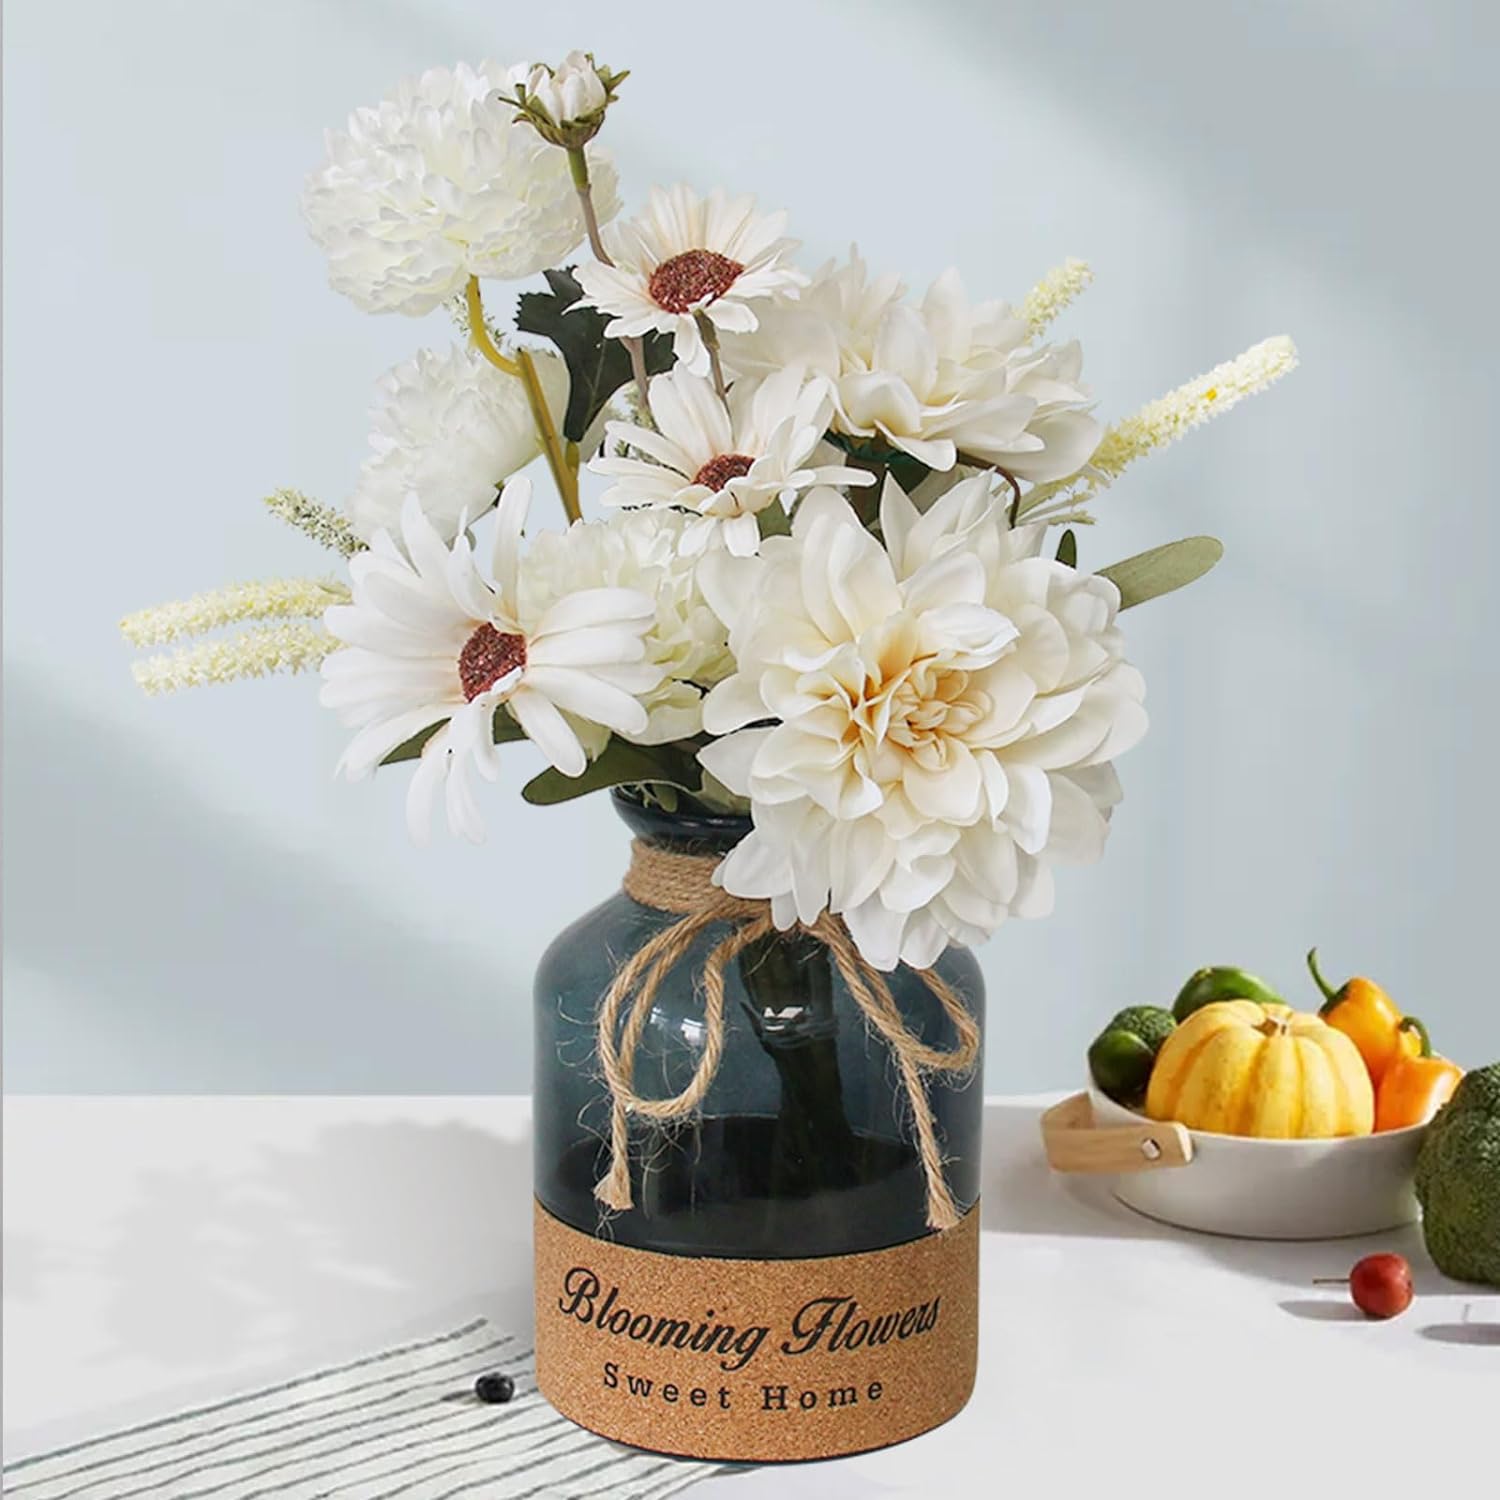 Leftover Faux Flowers in vase,Artificial Flowers in vase,Table centerpieces for Dining Room,Flower centerpieces for Tables,Fake Flowers with vase,Kitchen Table Decor,Coffee Table Decor